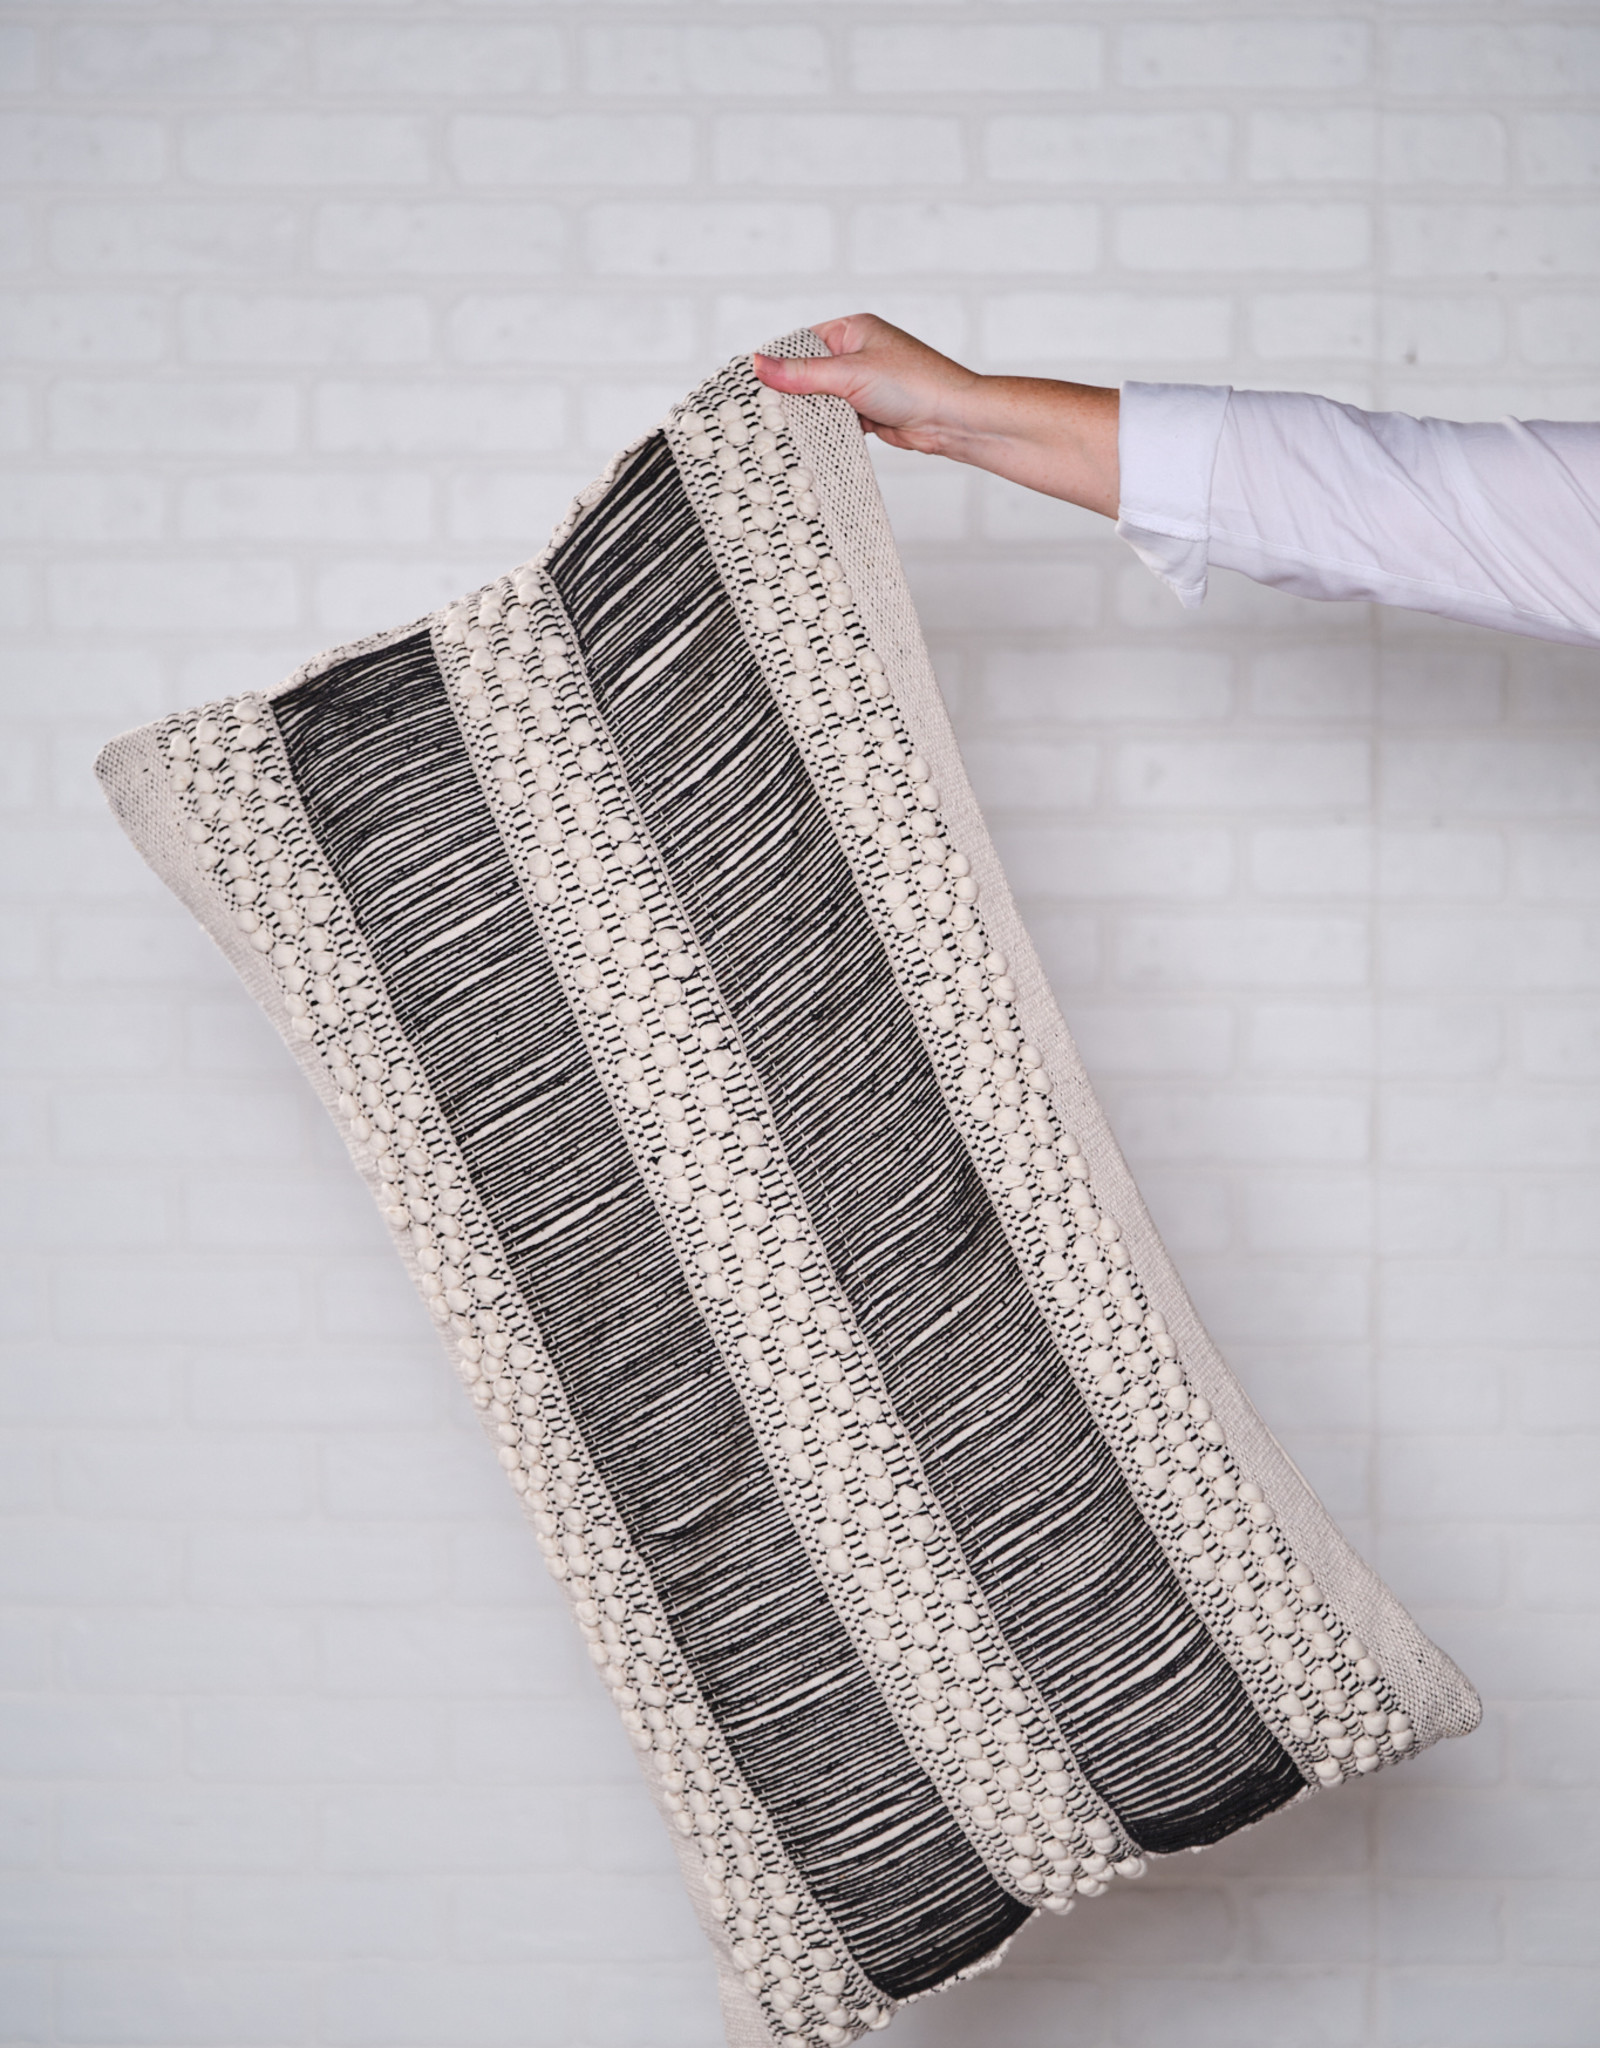 Serena Hand Woven Pillow Ivory/Black 20 " x 36"